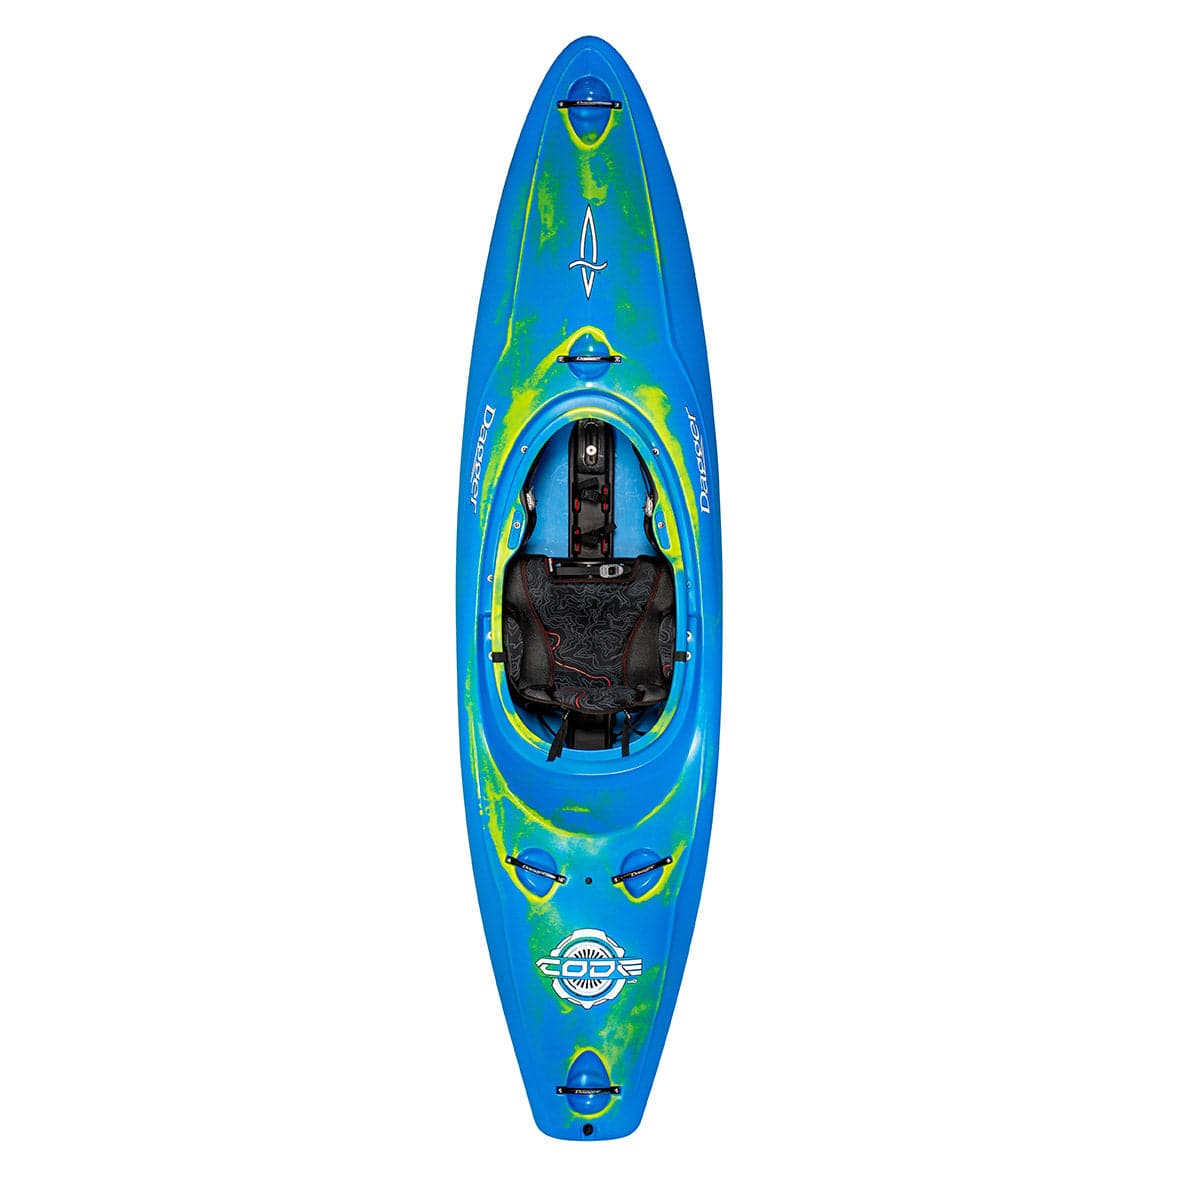 Featuring the Code creek boat, river runner kayak manufactured by Dagger shown here from one angle.